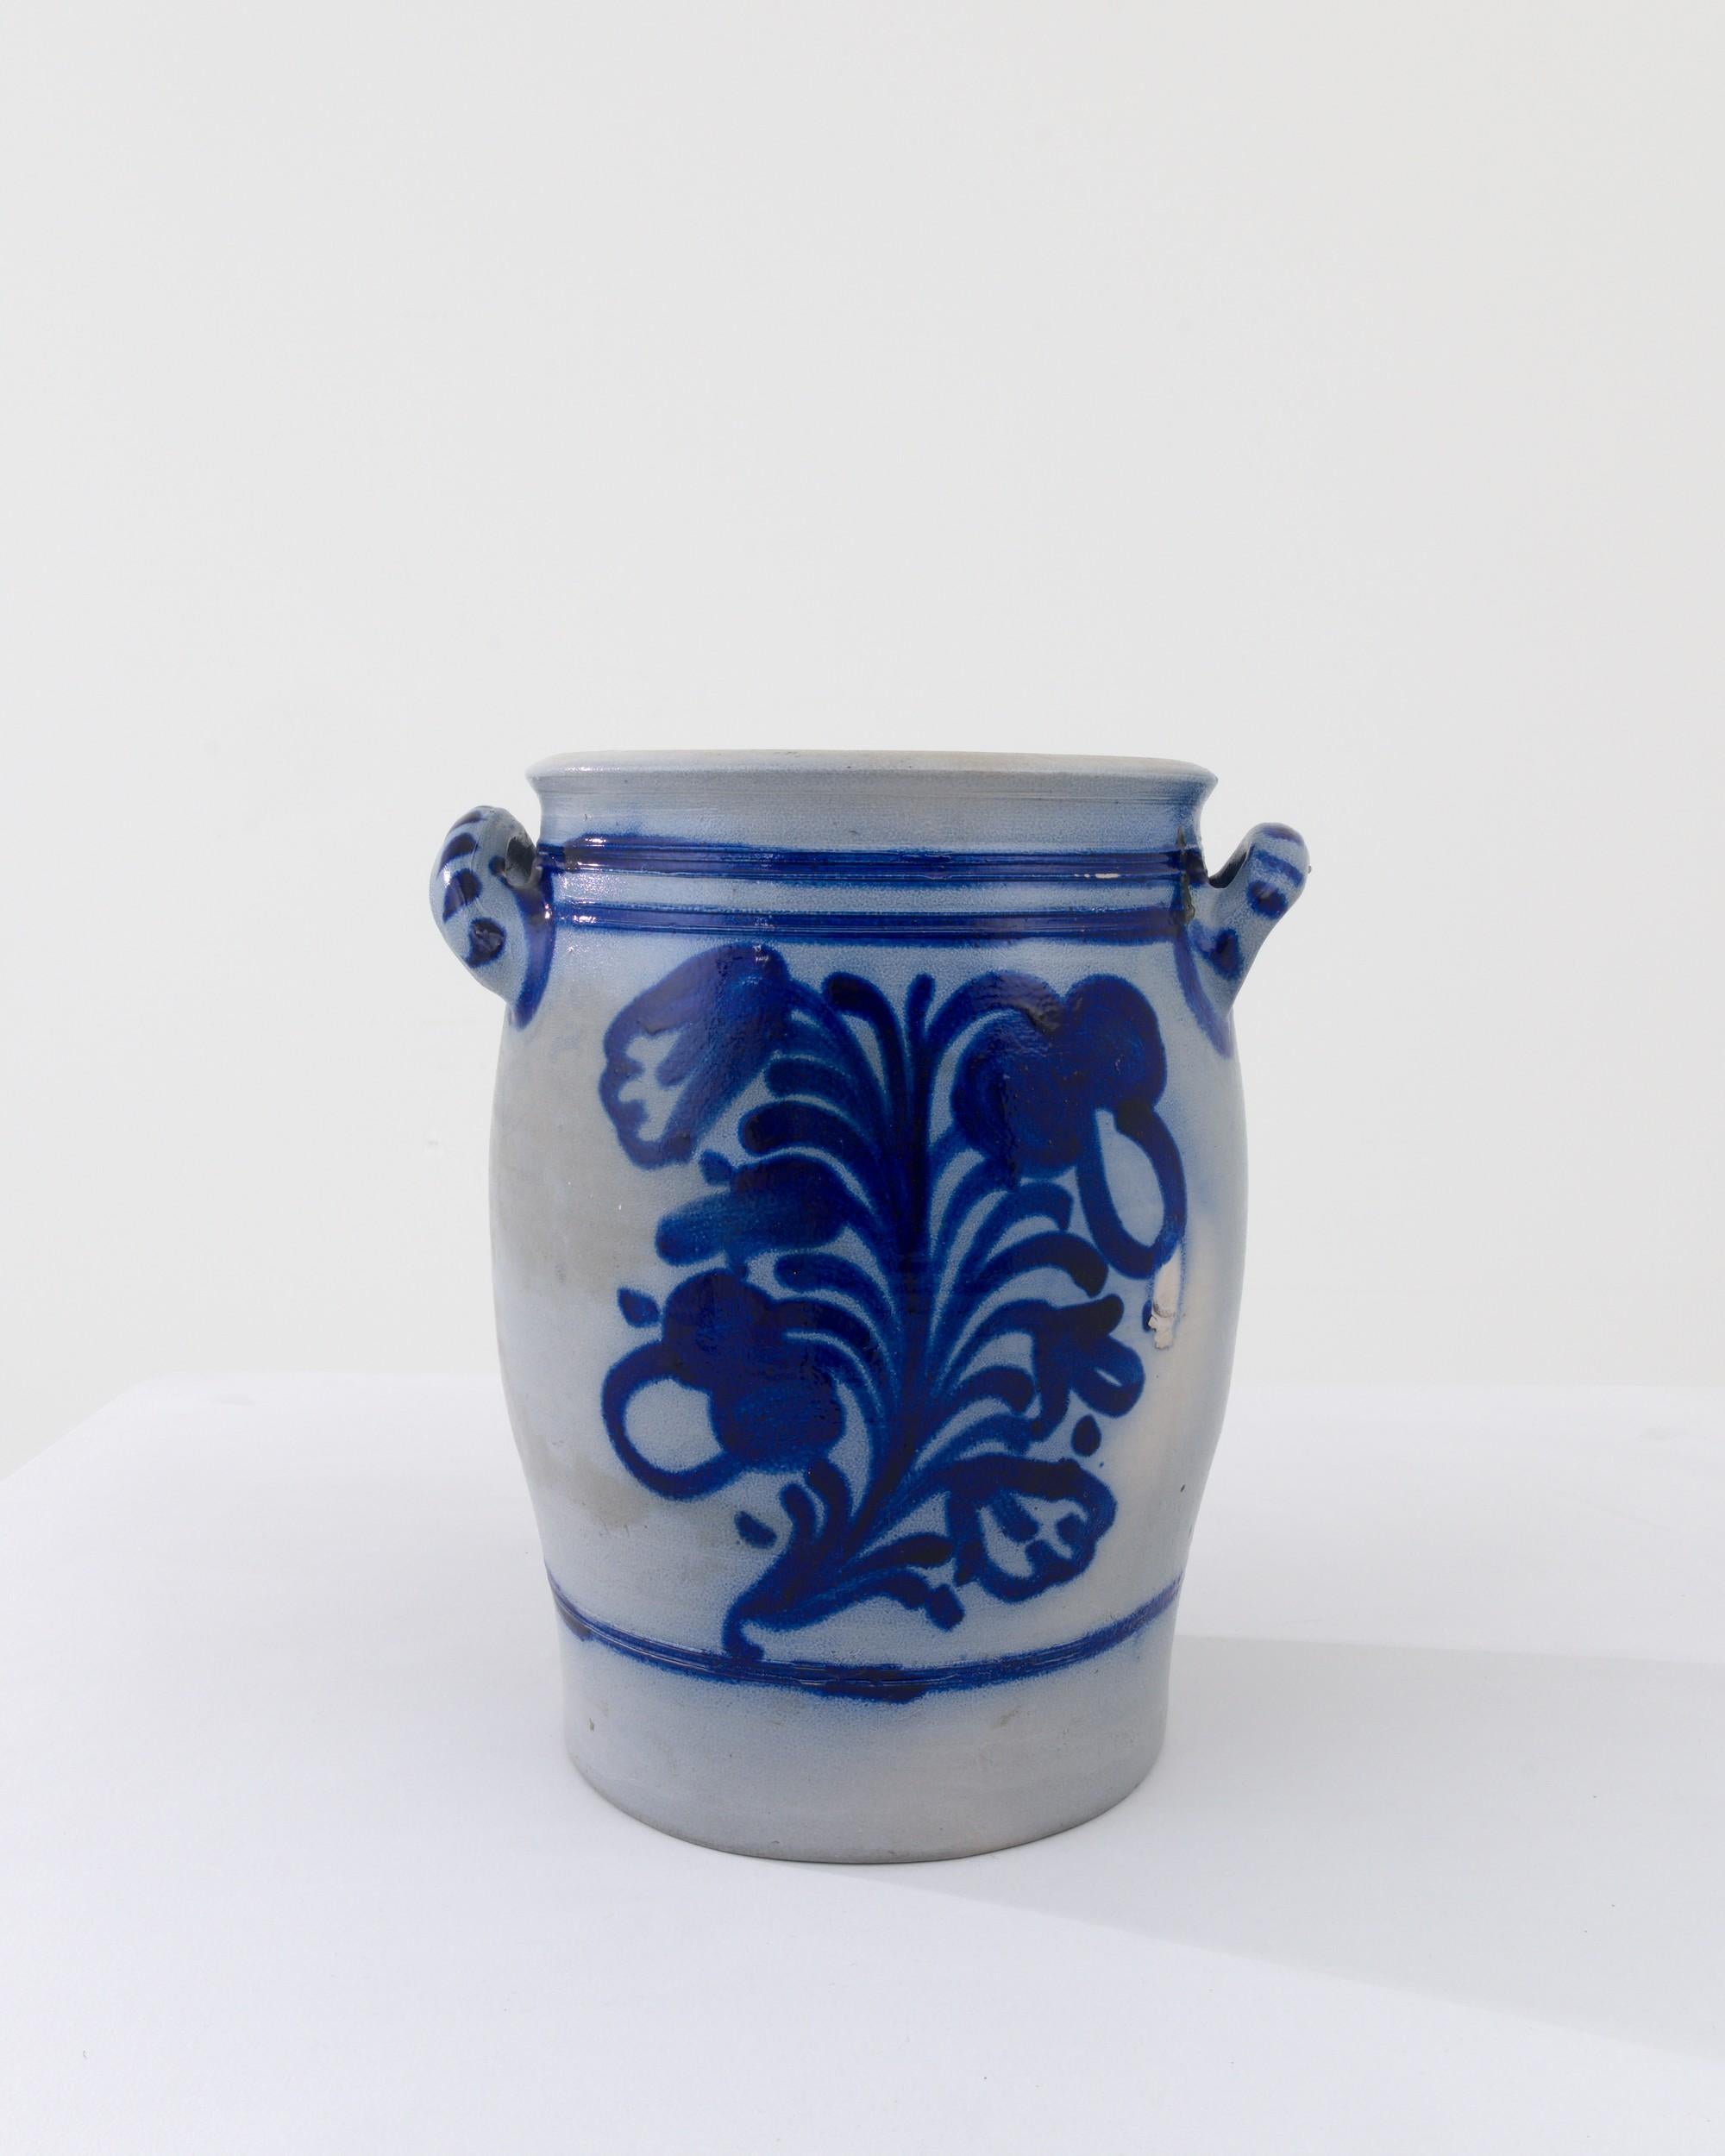 These three typical country pots are finished with a distinctive vivid blue salt glaze, enhancing the rounded clay base with a charming nature inspired motif. The dominant form of storage for food or agricultural purposes for thousands of years,